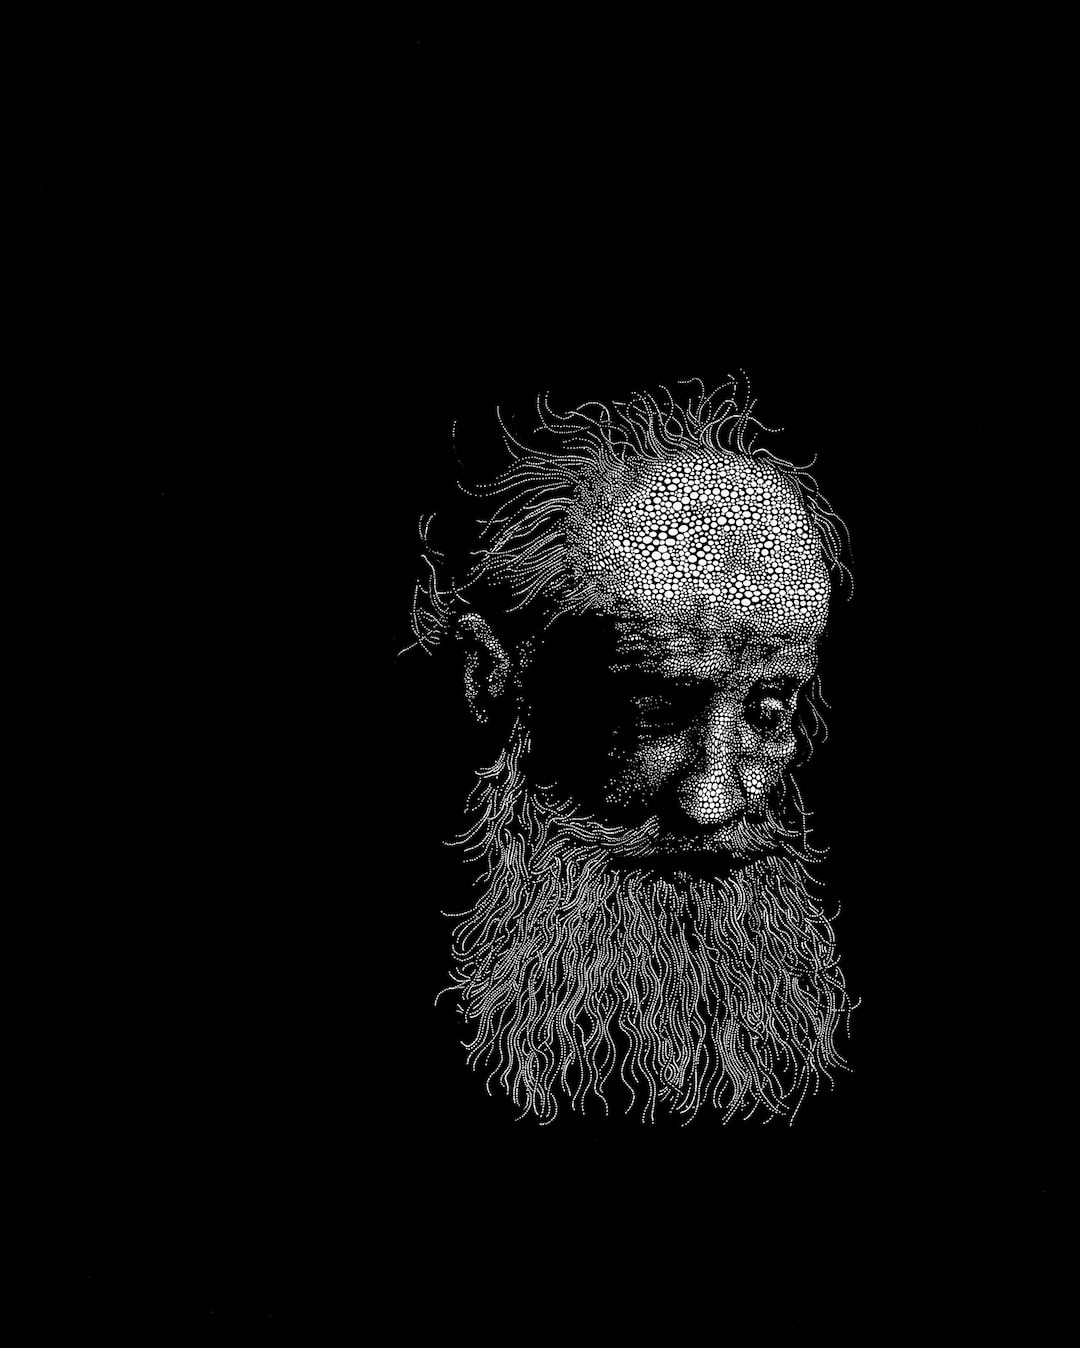 Sebastiaan Bremer Man with Flowing Beard black and white image of Old Masters style man's head painted with dots emerging from black background